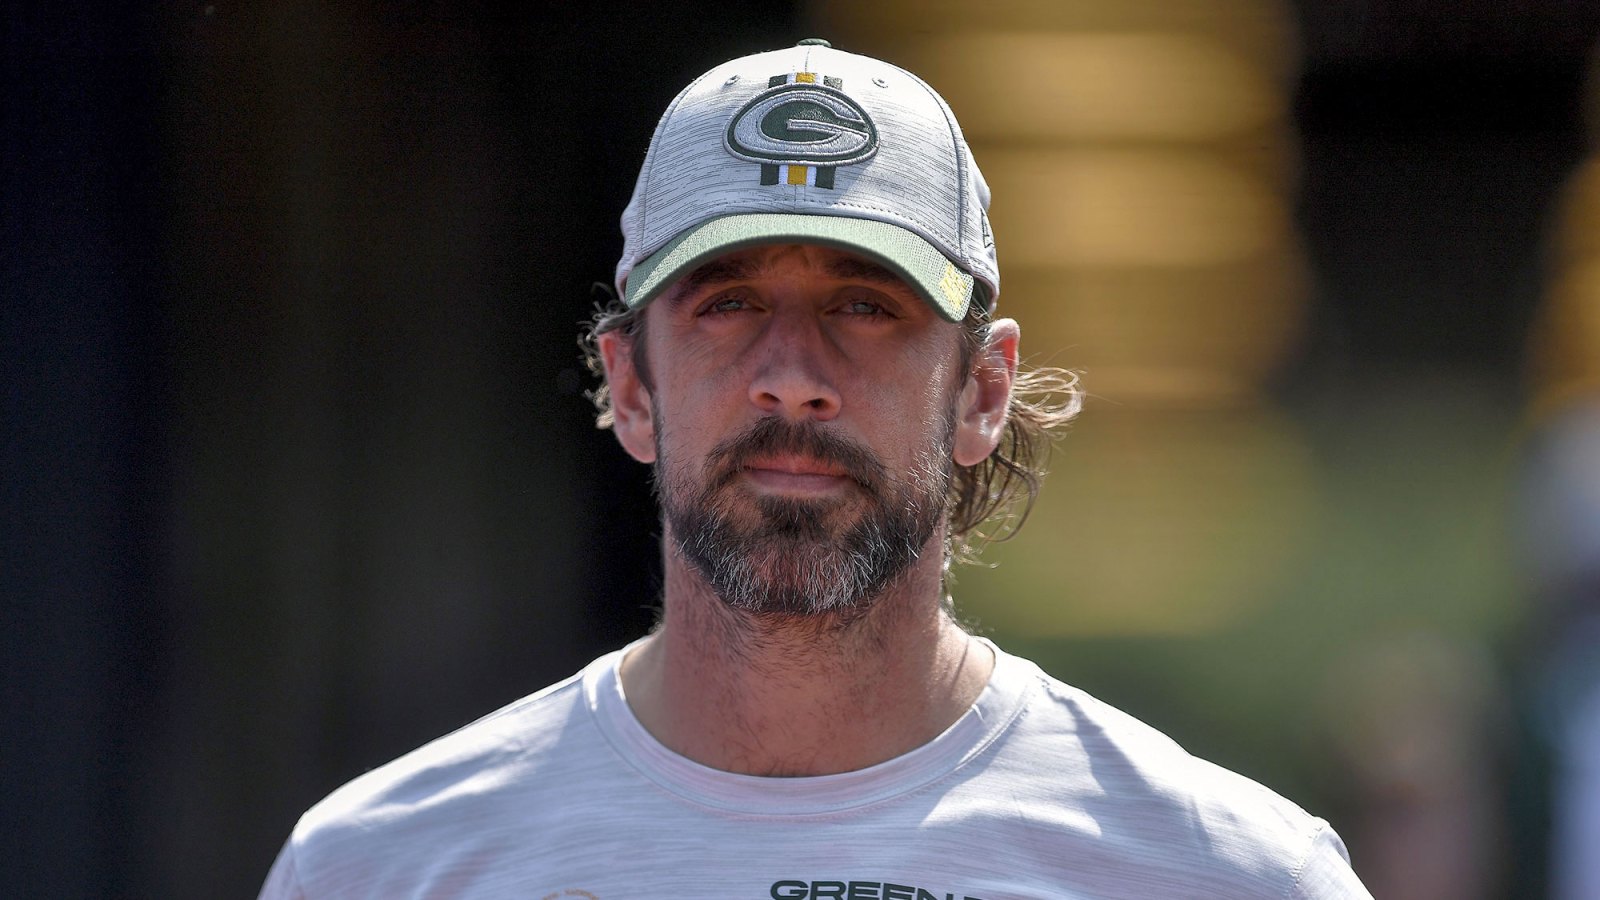 Aaron Rodgers Explains Why His Hopes of Becoming a Father Prevented Him From Getting the COVID-19 Vaccine